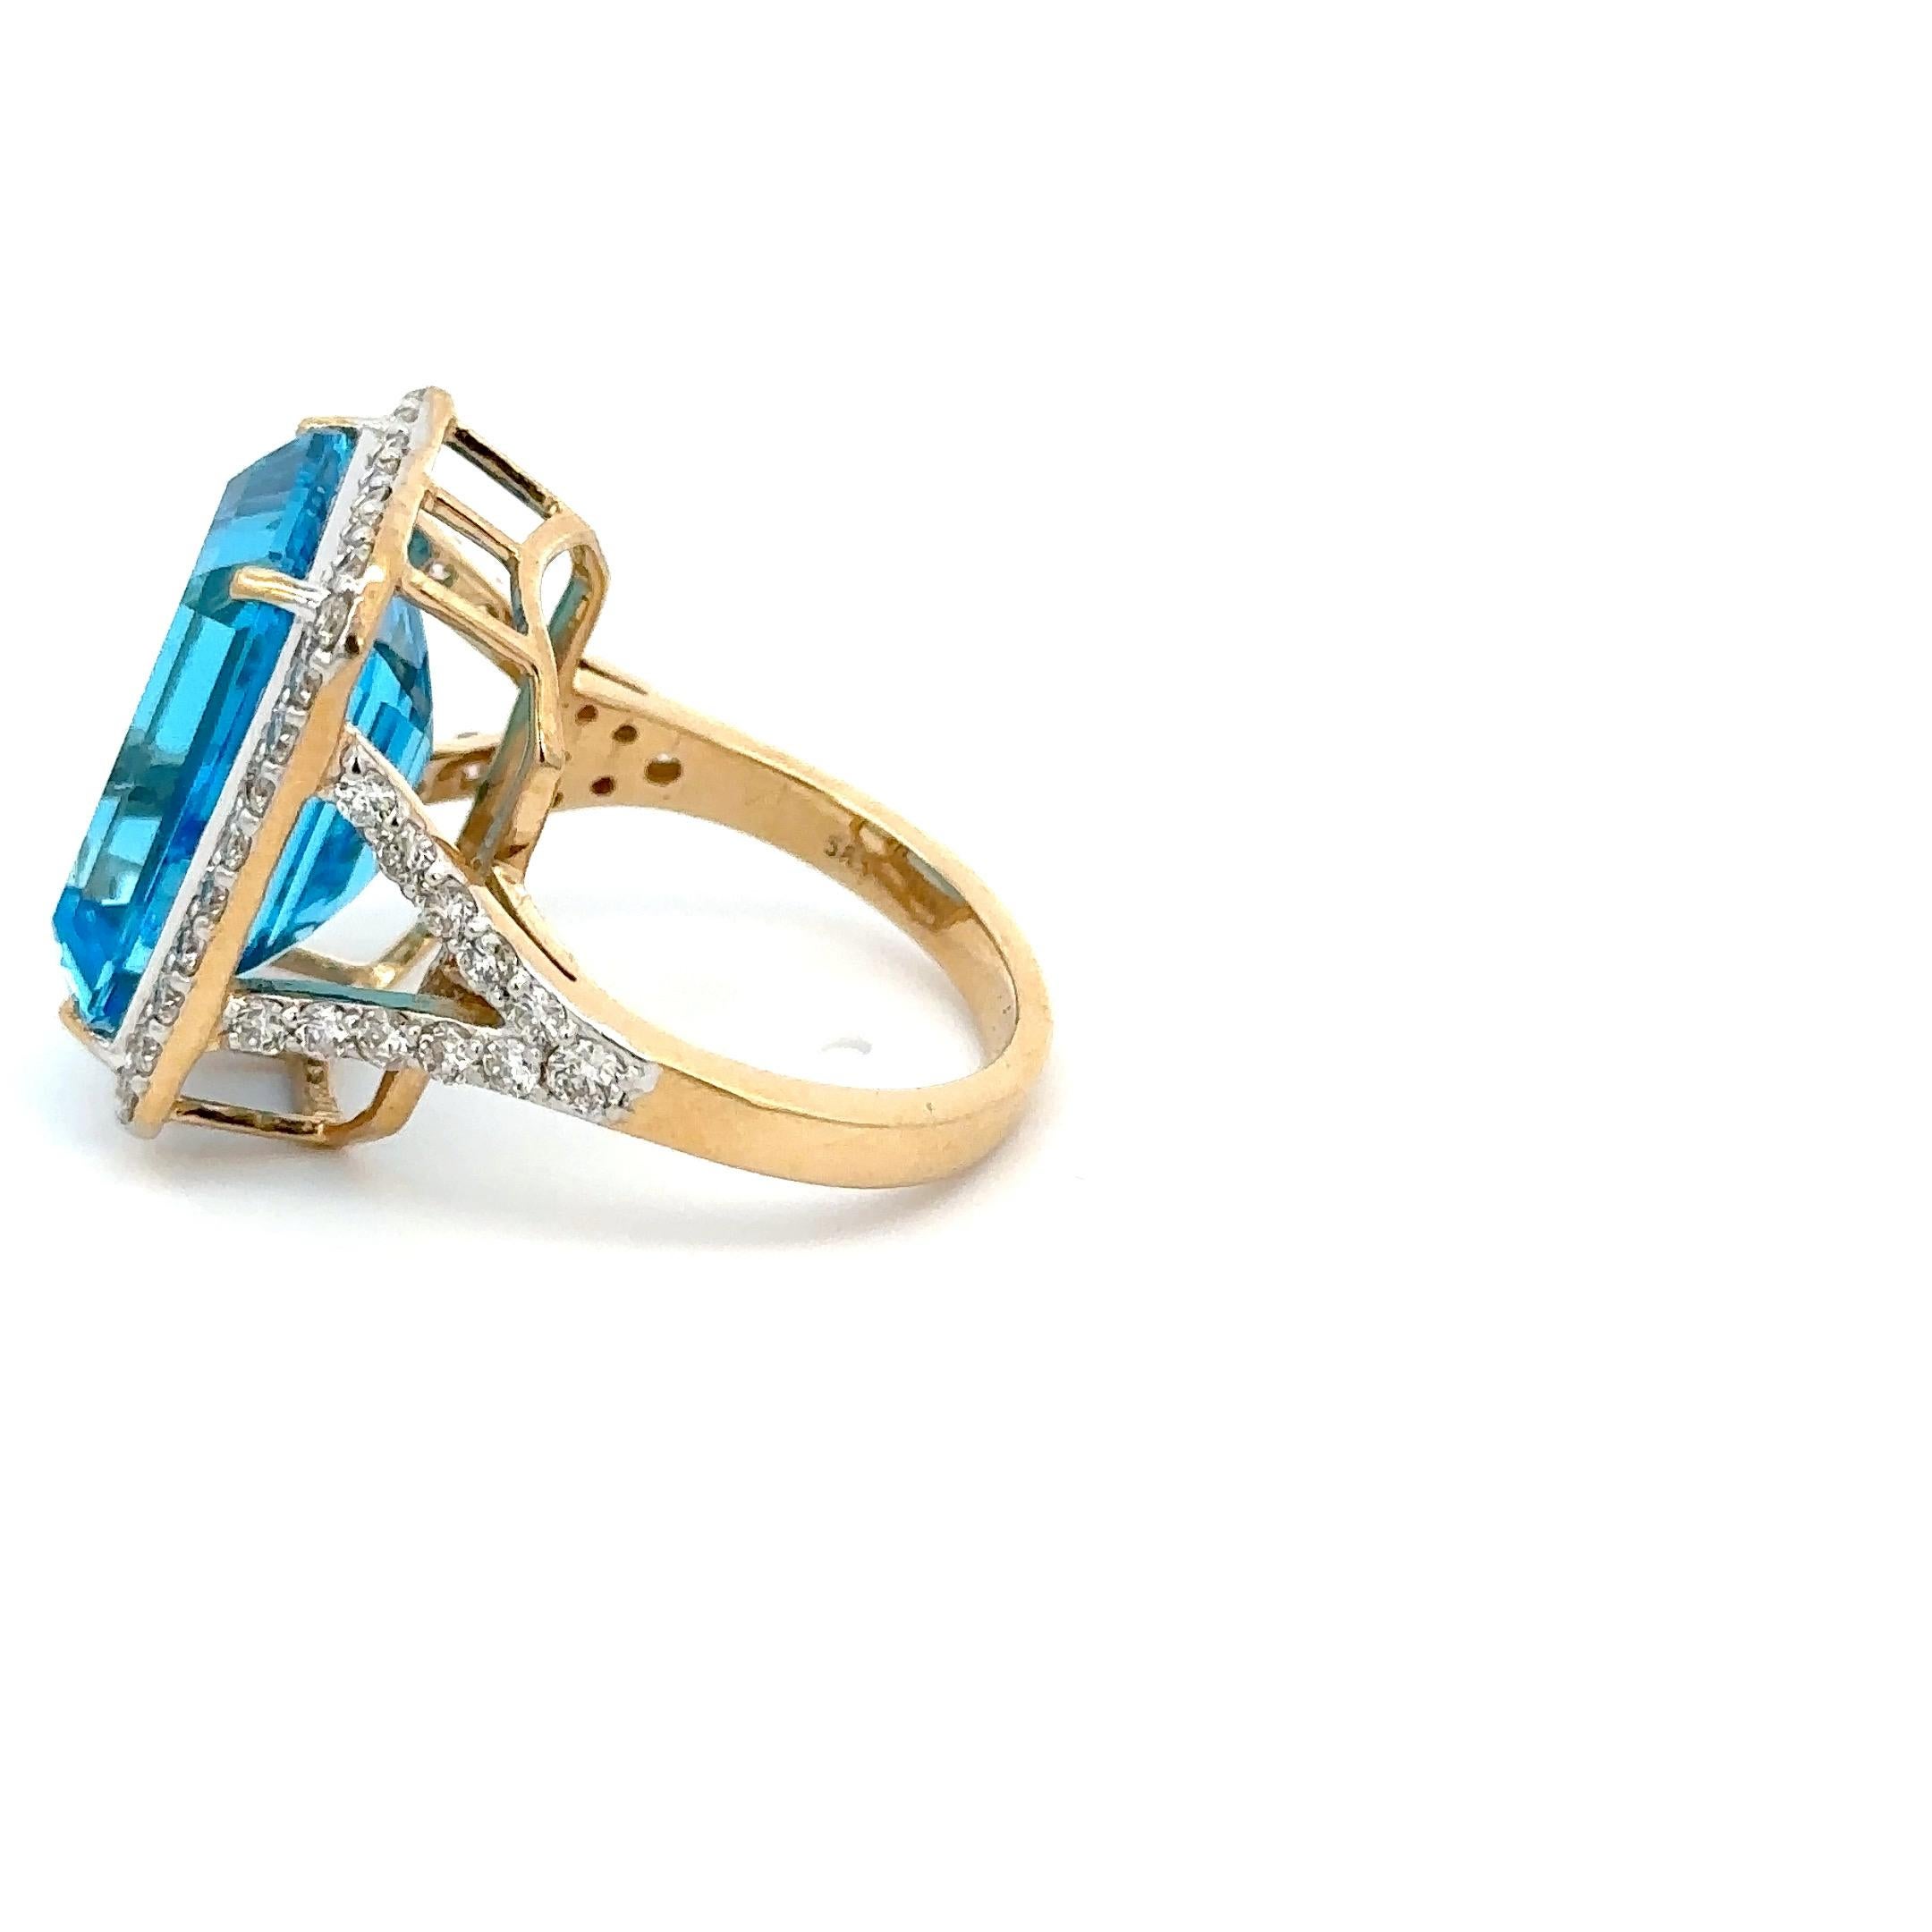 For Sale:  14k Solid Yellow Gold Large 15.41 CTW Blue Topaz Halo Diamond Cocktail Ring 4